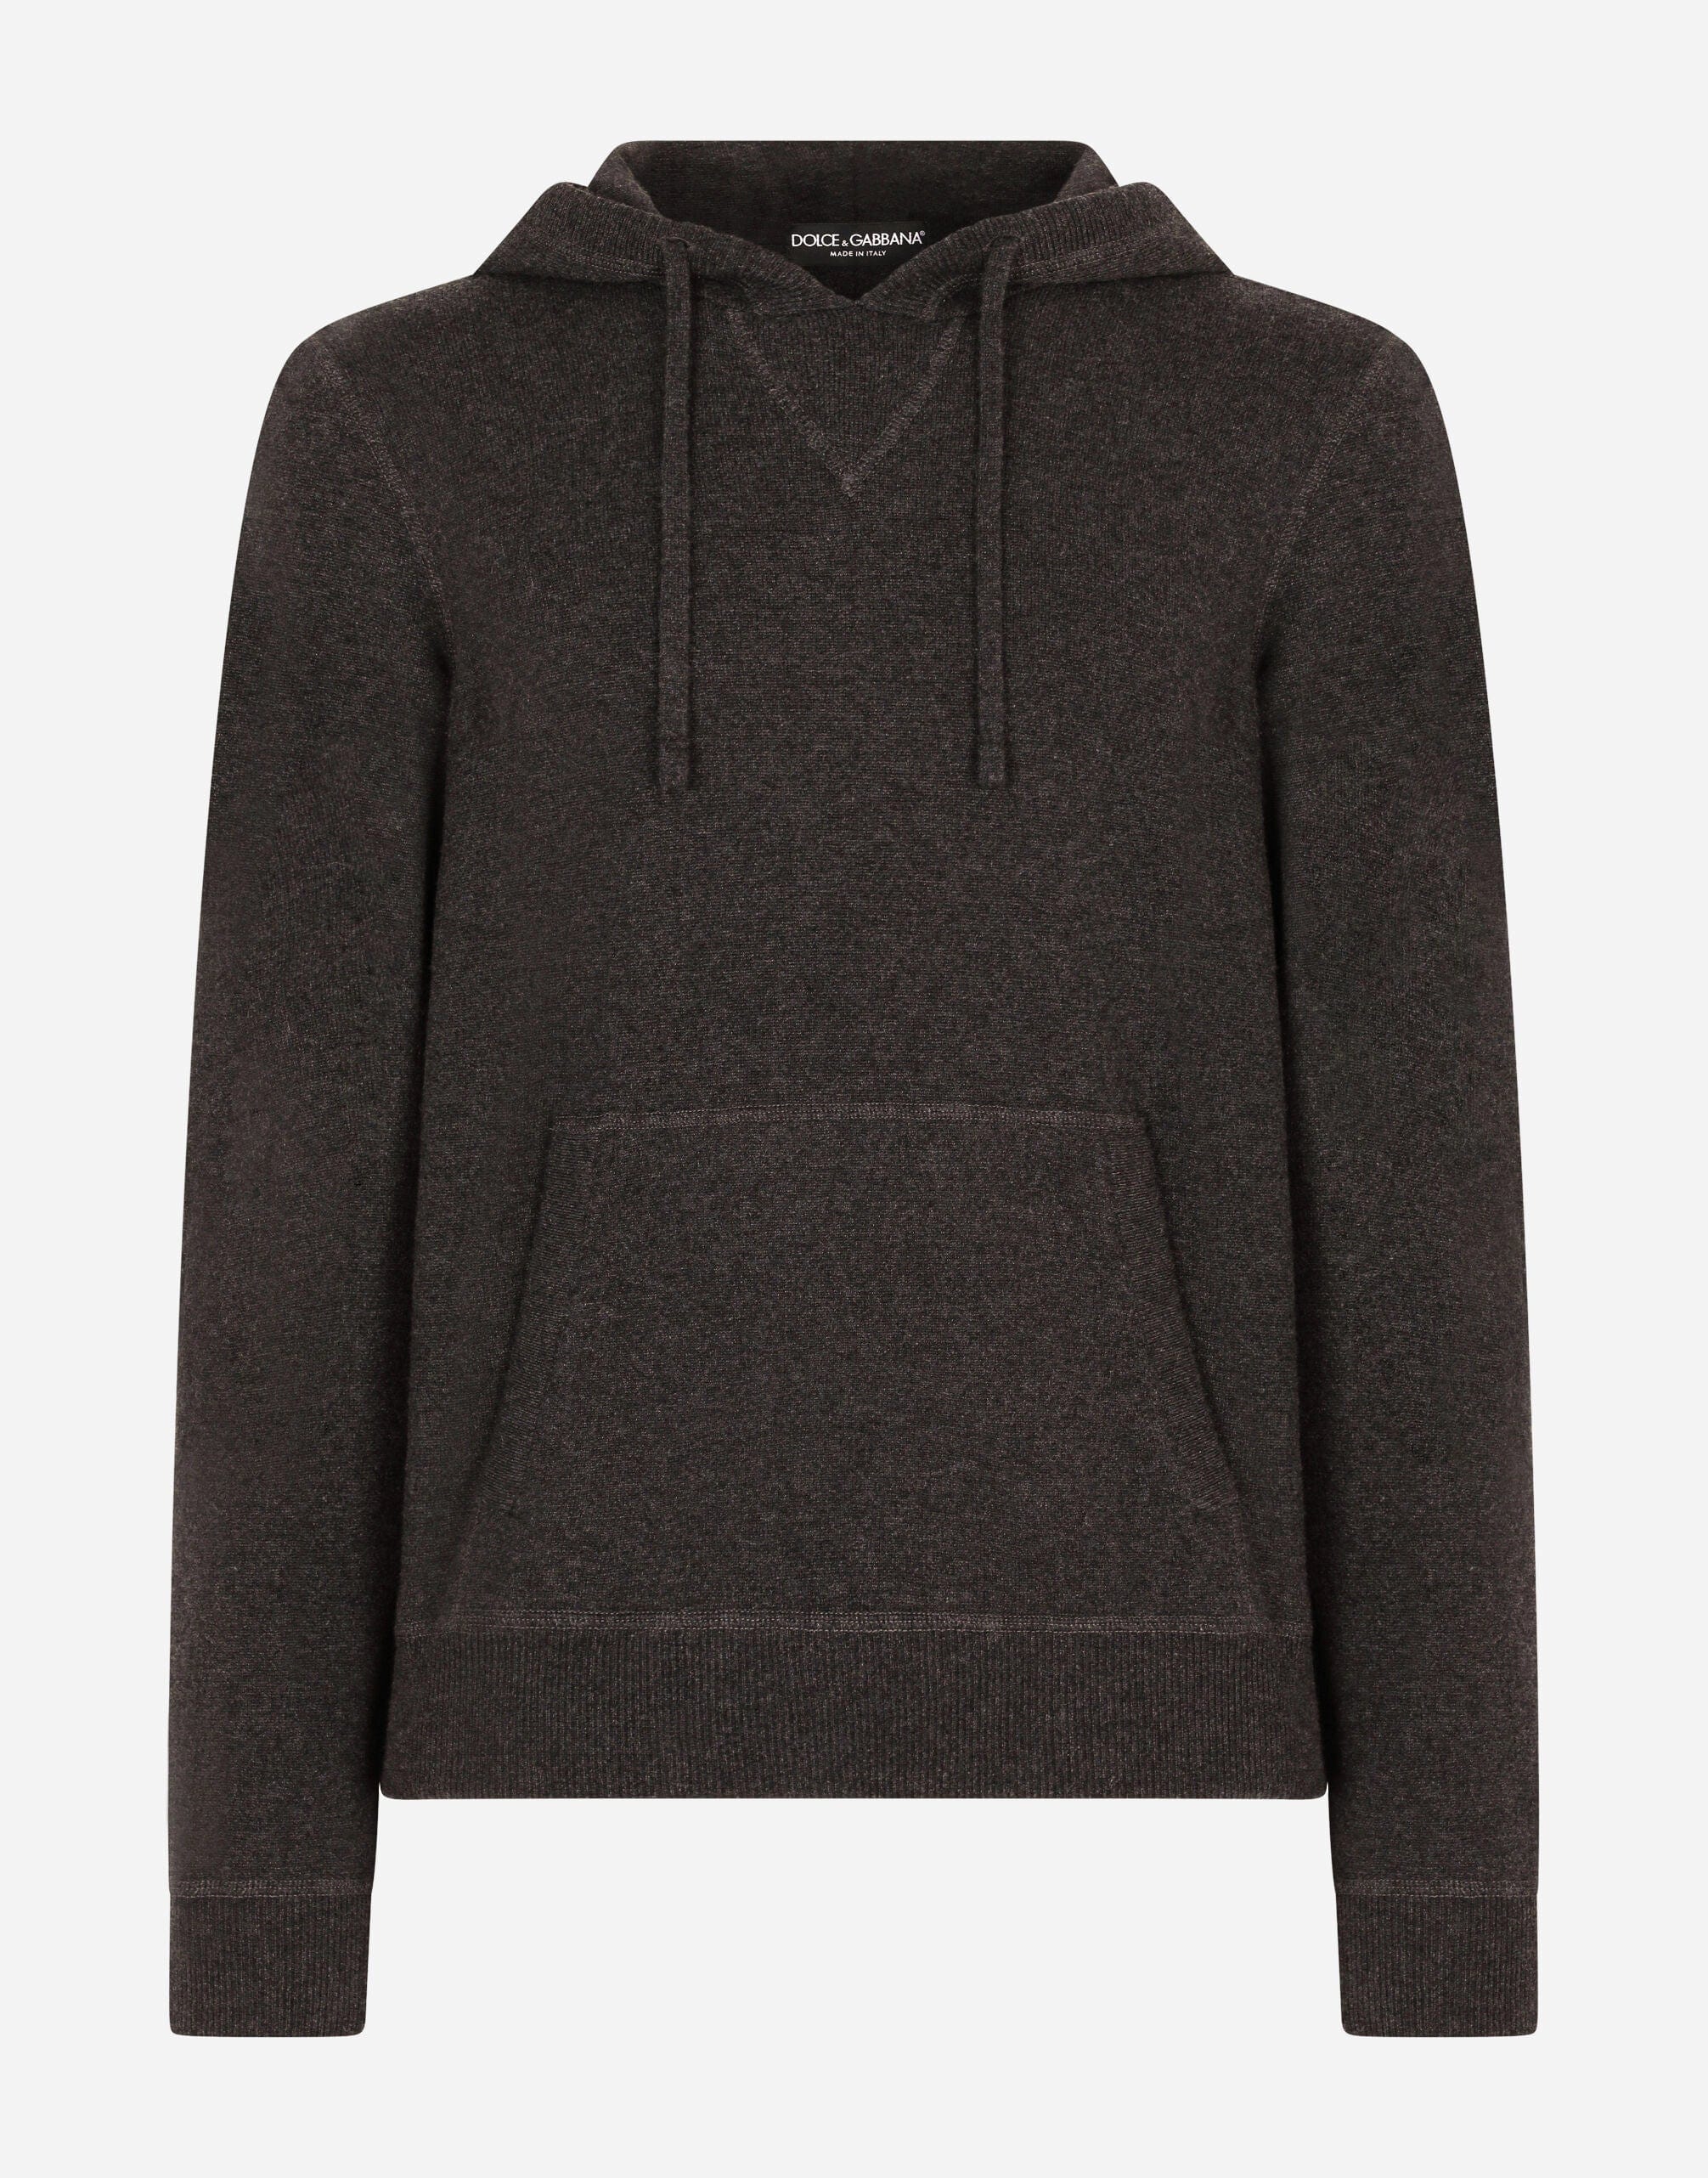 Dolce & Gabbana Cashmere Hoodie With Drawstring